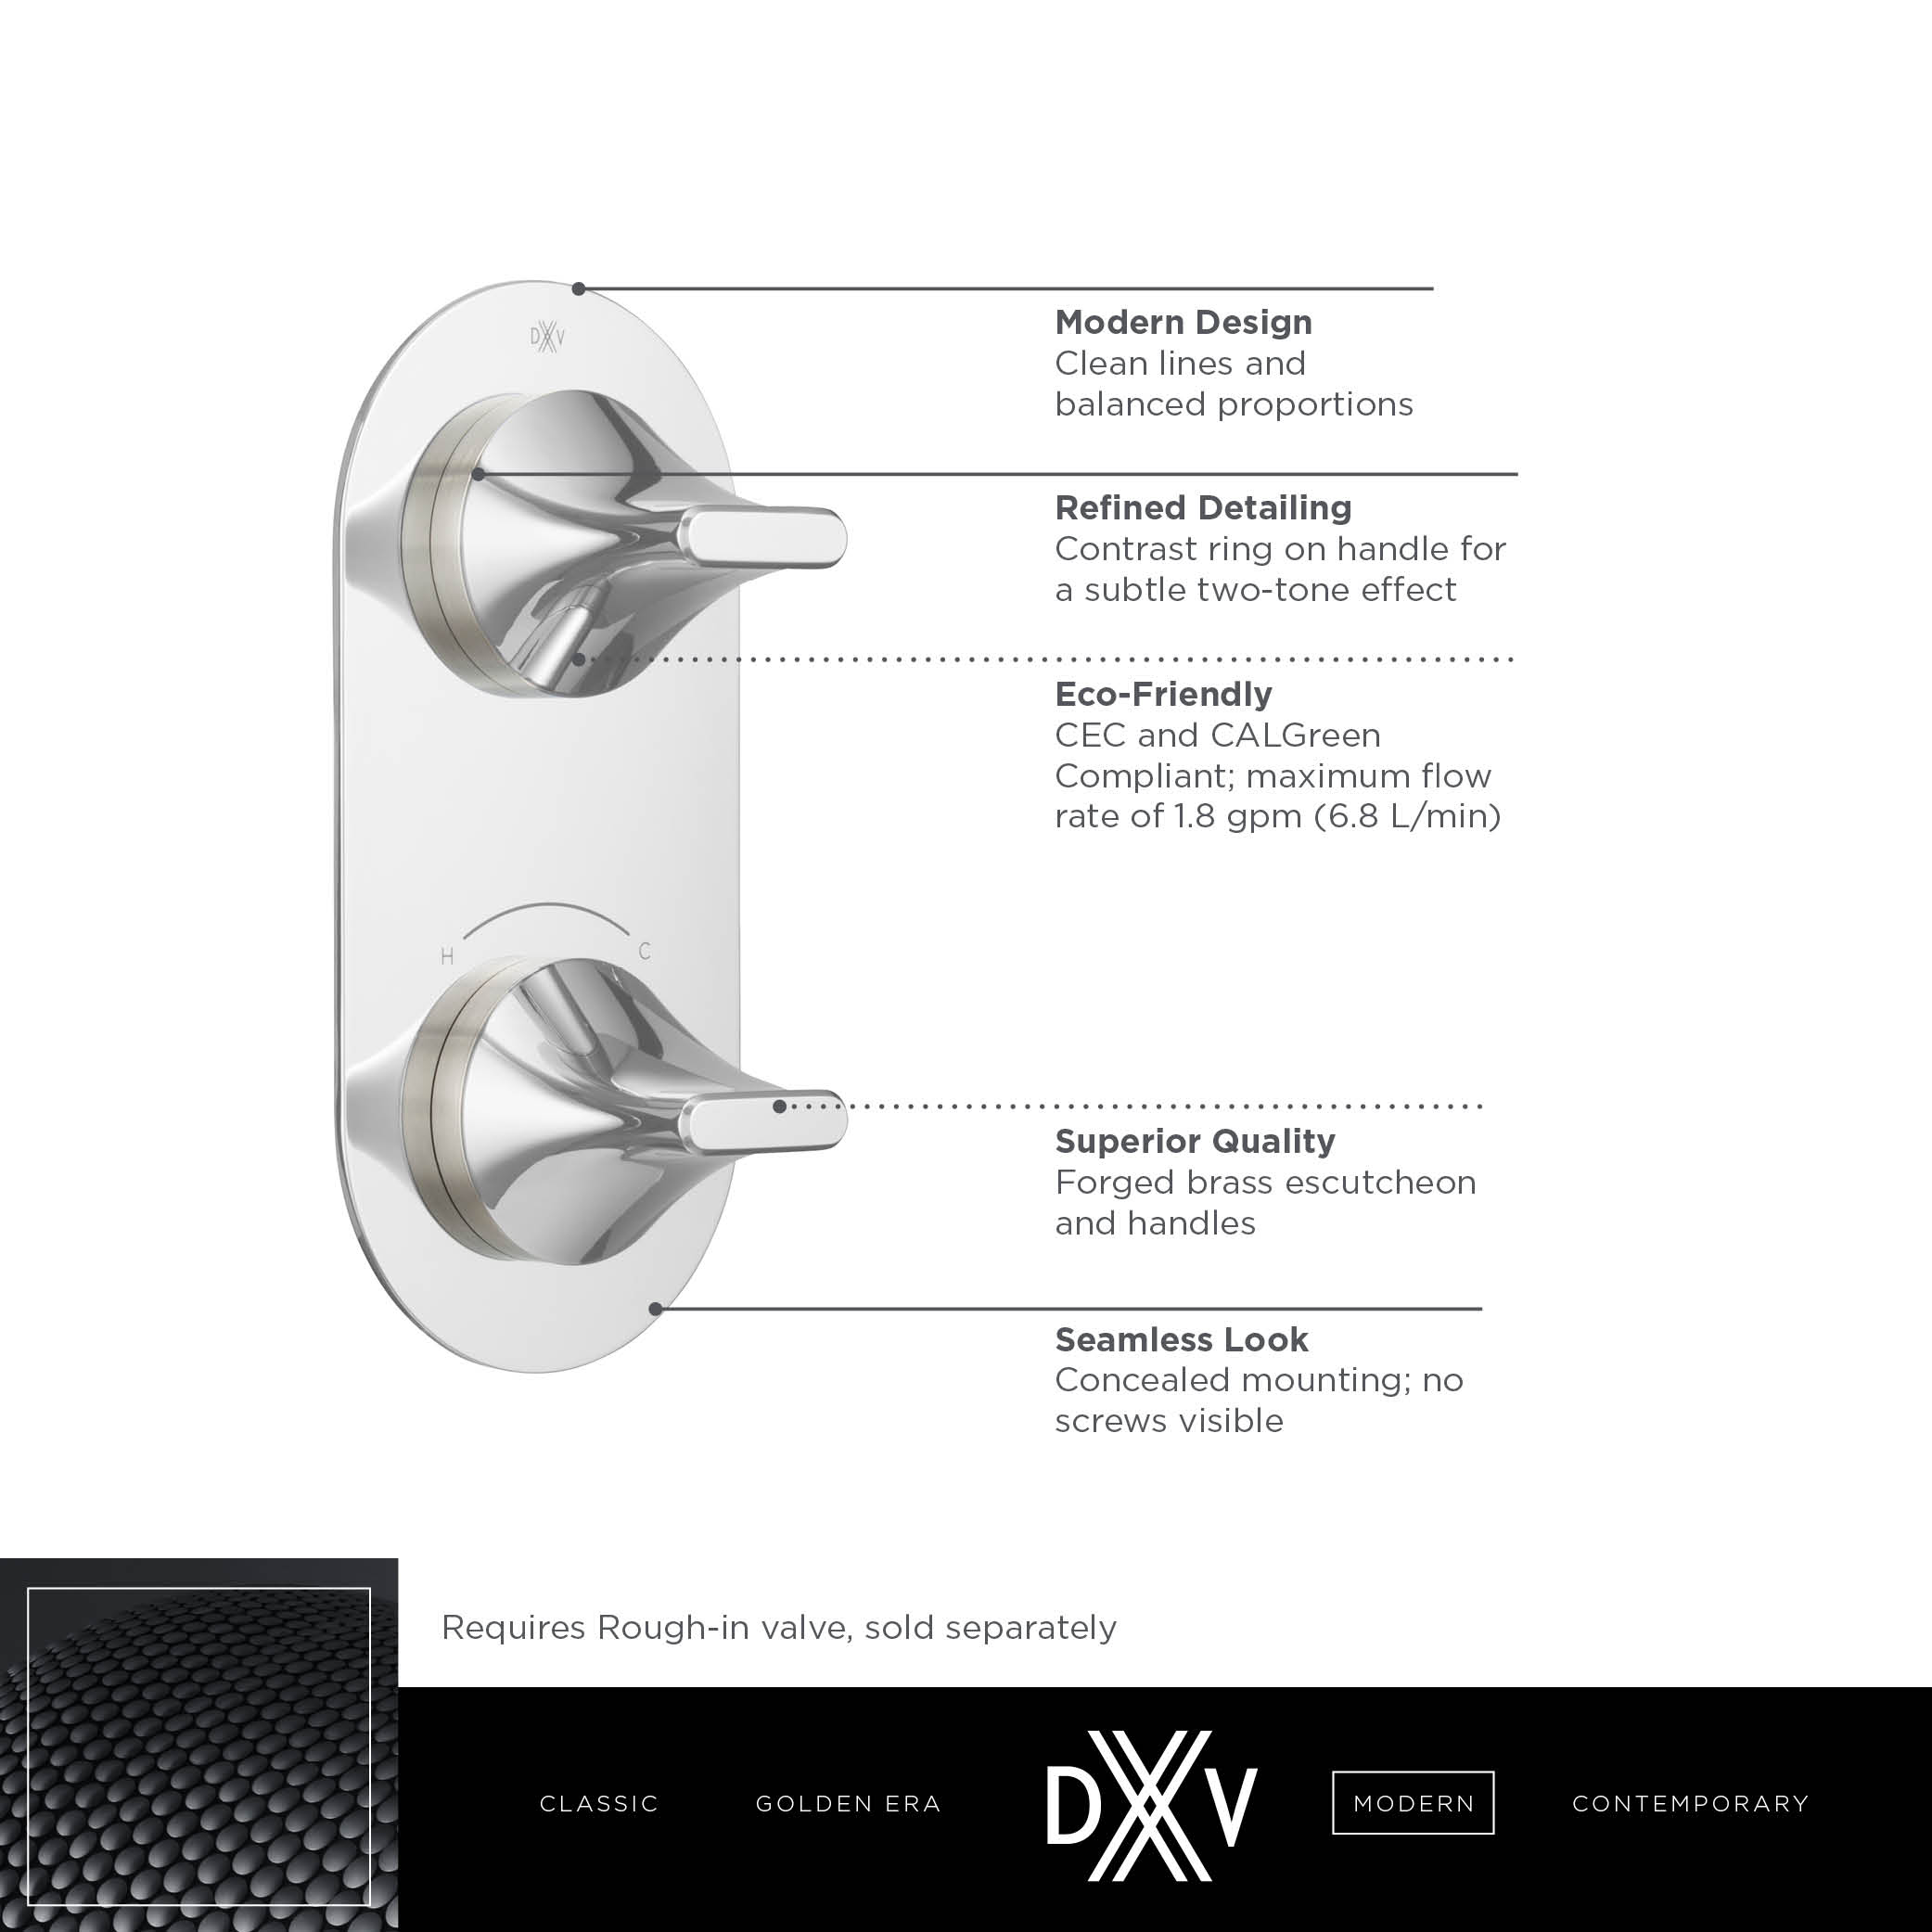 DXV Modulus 2-Handle Thermostatic Valve Trim Only